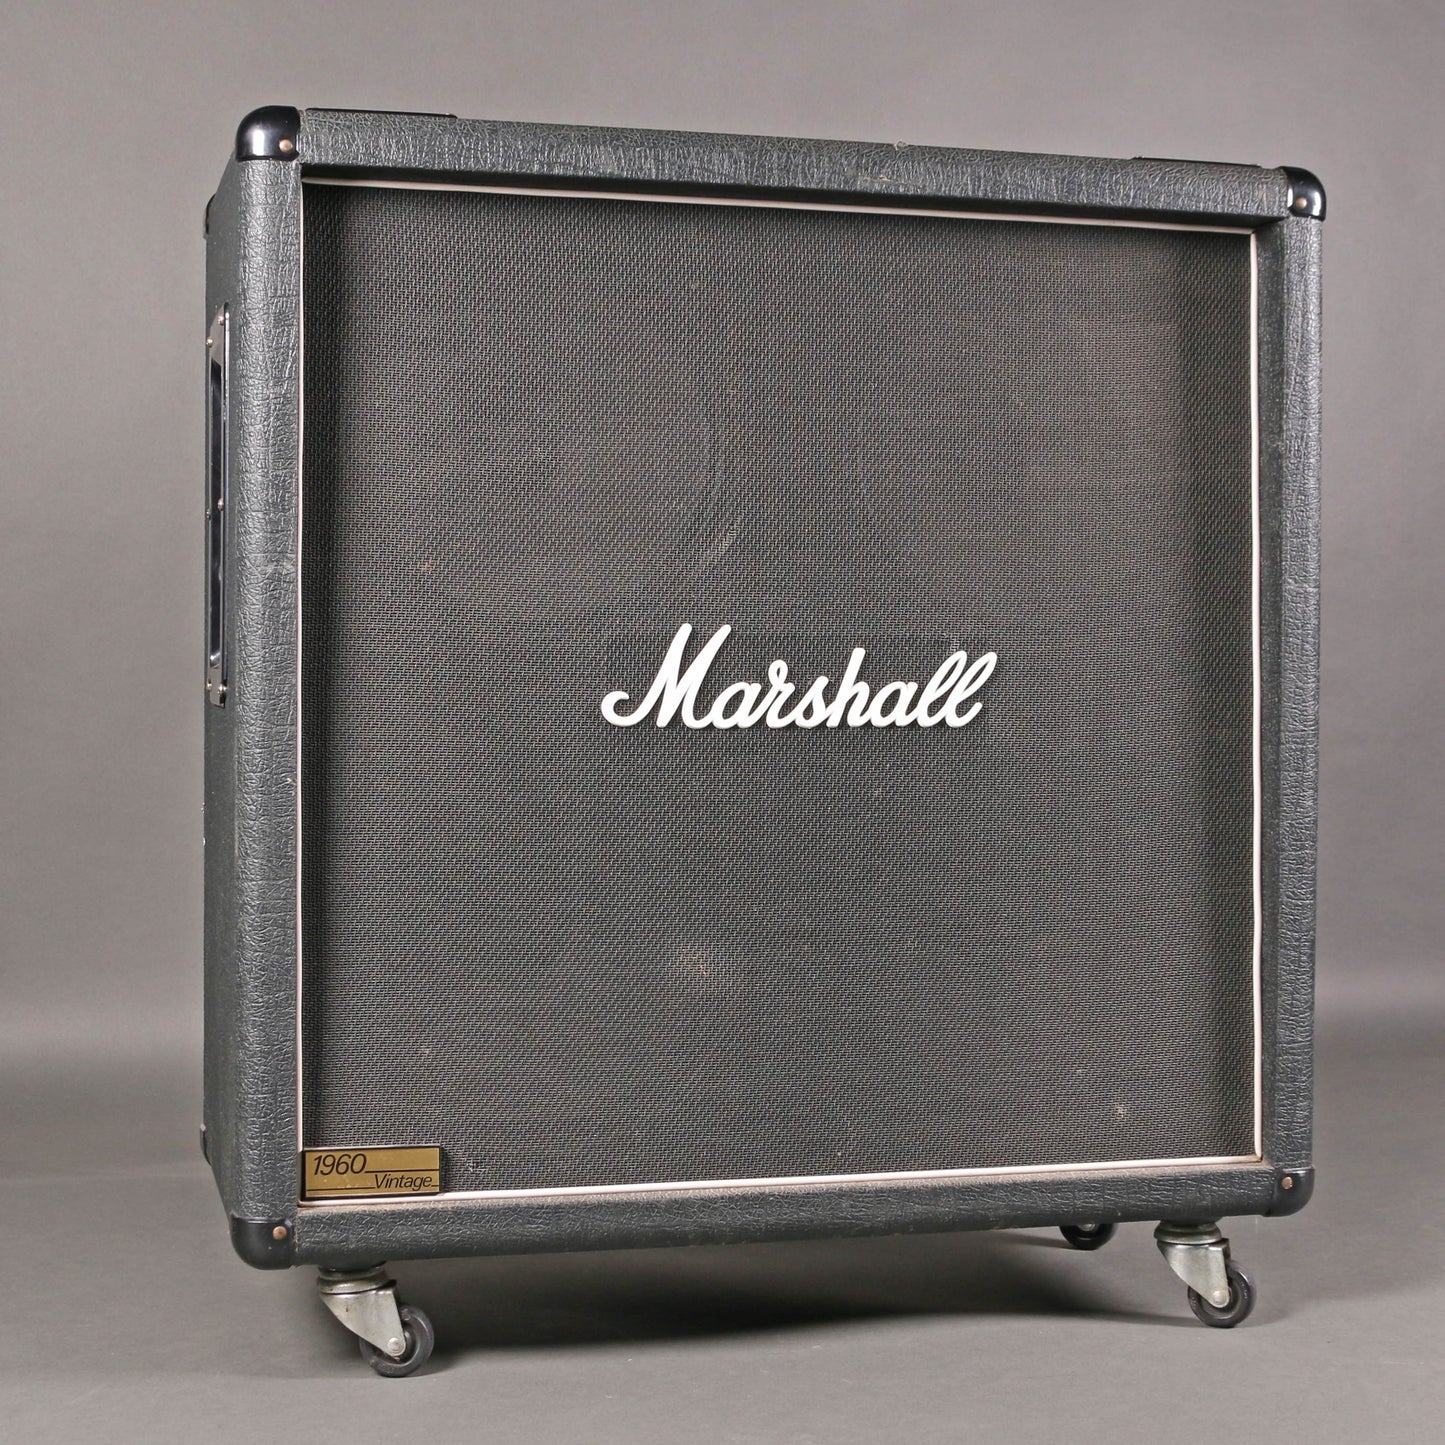 1990s Marchall 1960BV 4x12" Cabinet